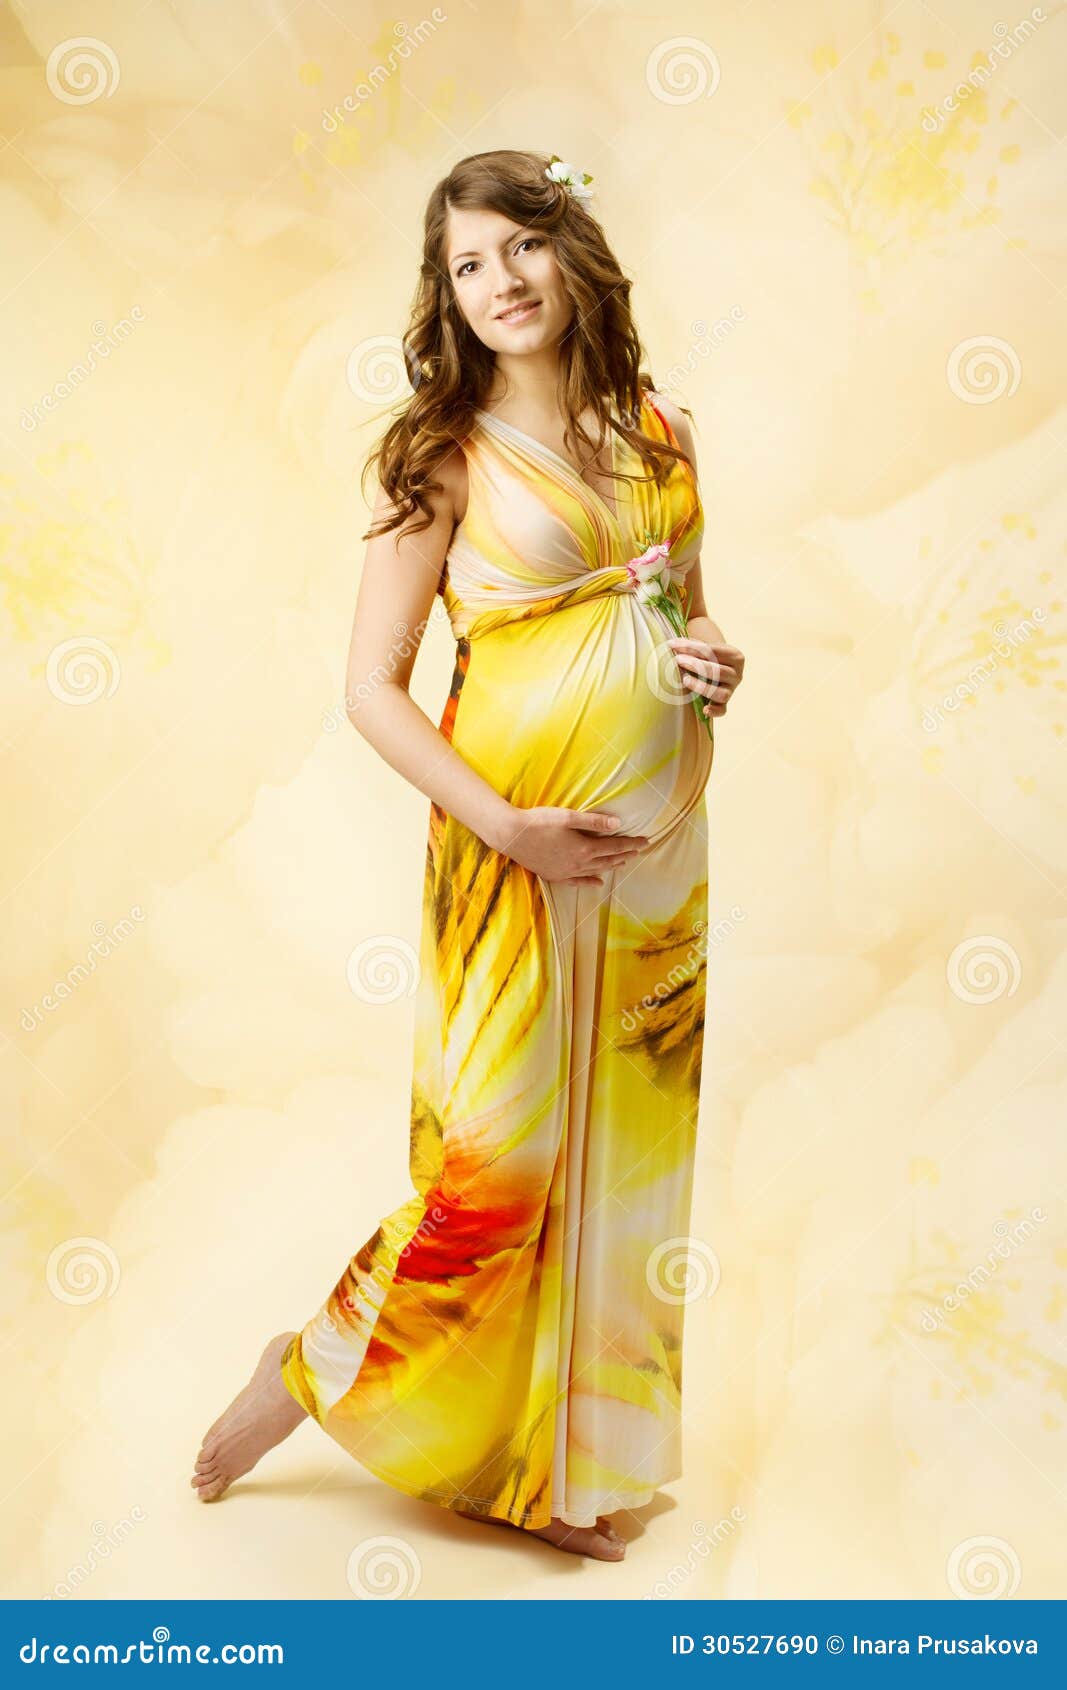 Pregnant Woman In Long Dress Over Yellow Art Background 